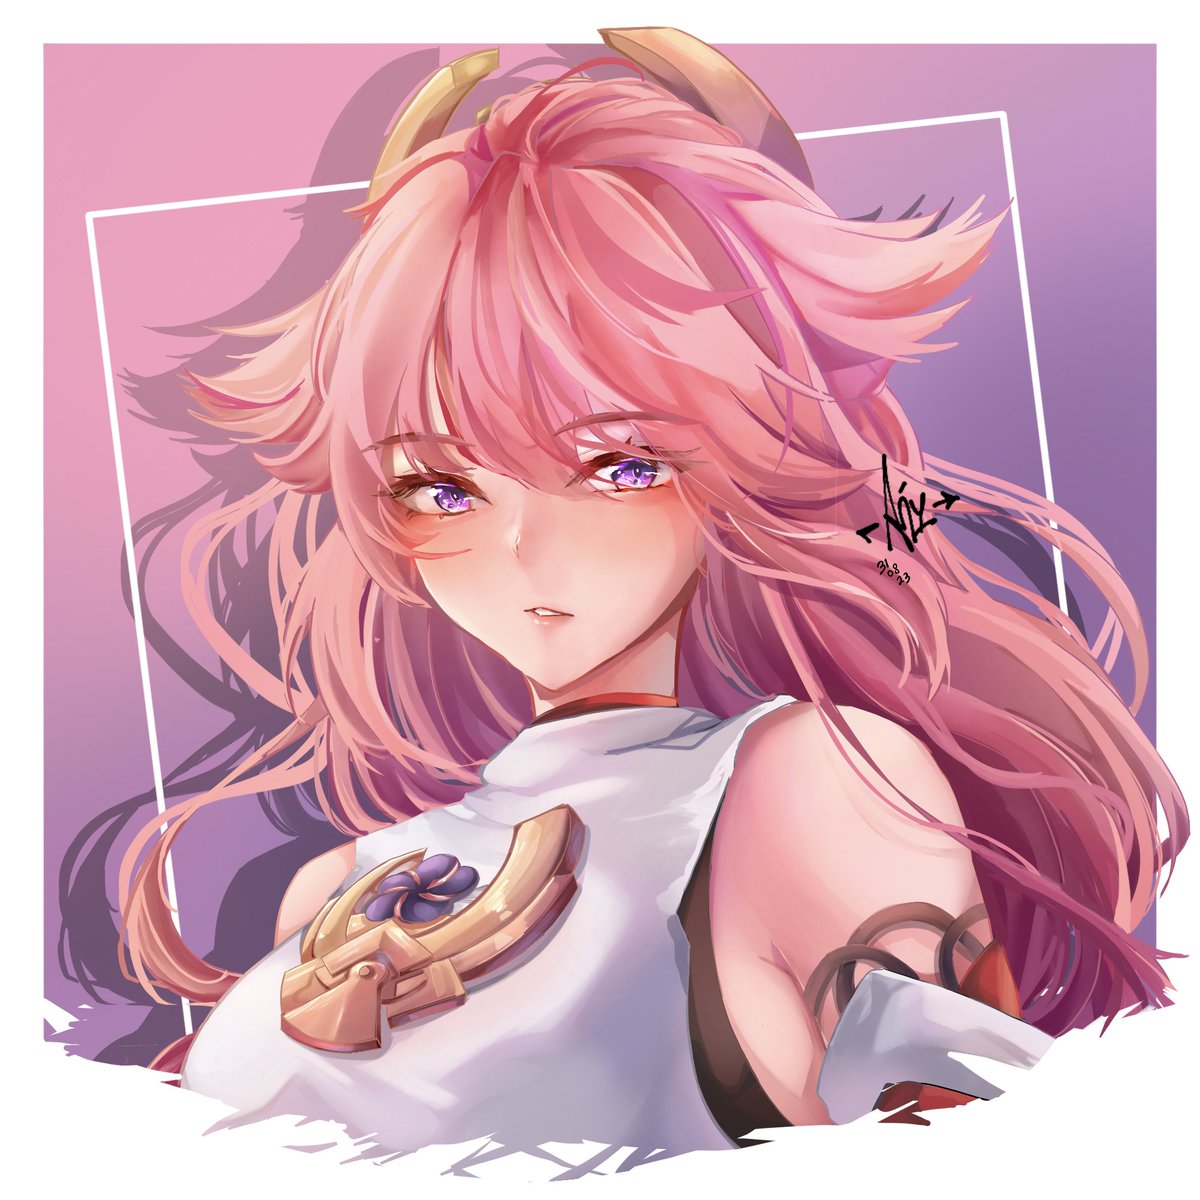 August 2023 Fanart, Yae miko from Genshin Impact~ drew lots of icon/bustup artwork during that time for comms sample~ amniwaaay my commission is still open :> #illustshare #原神 #illustration #fanart #Genshinlmpact #genshinimpactfanart #yaemiko #commissionopen